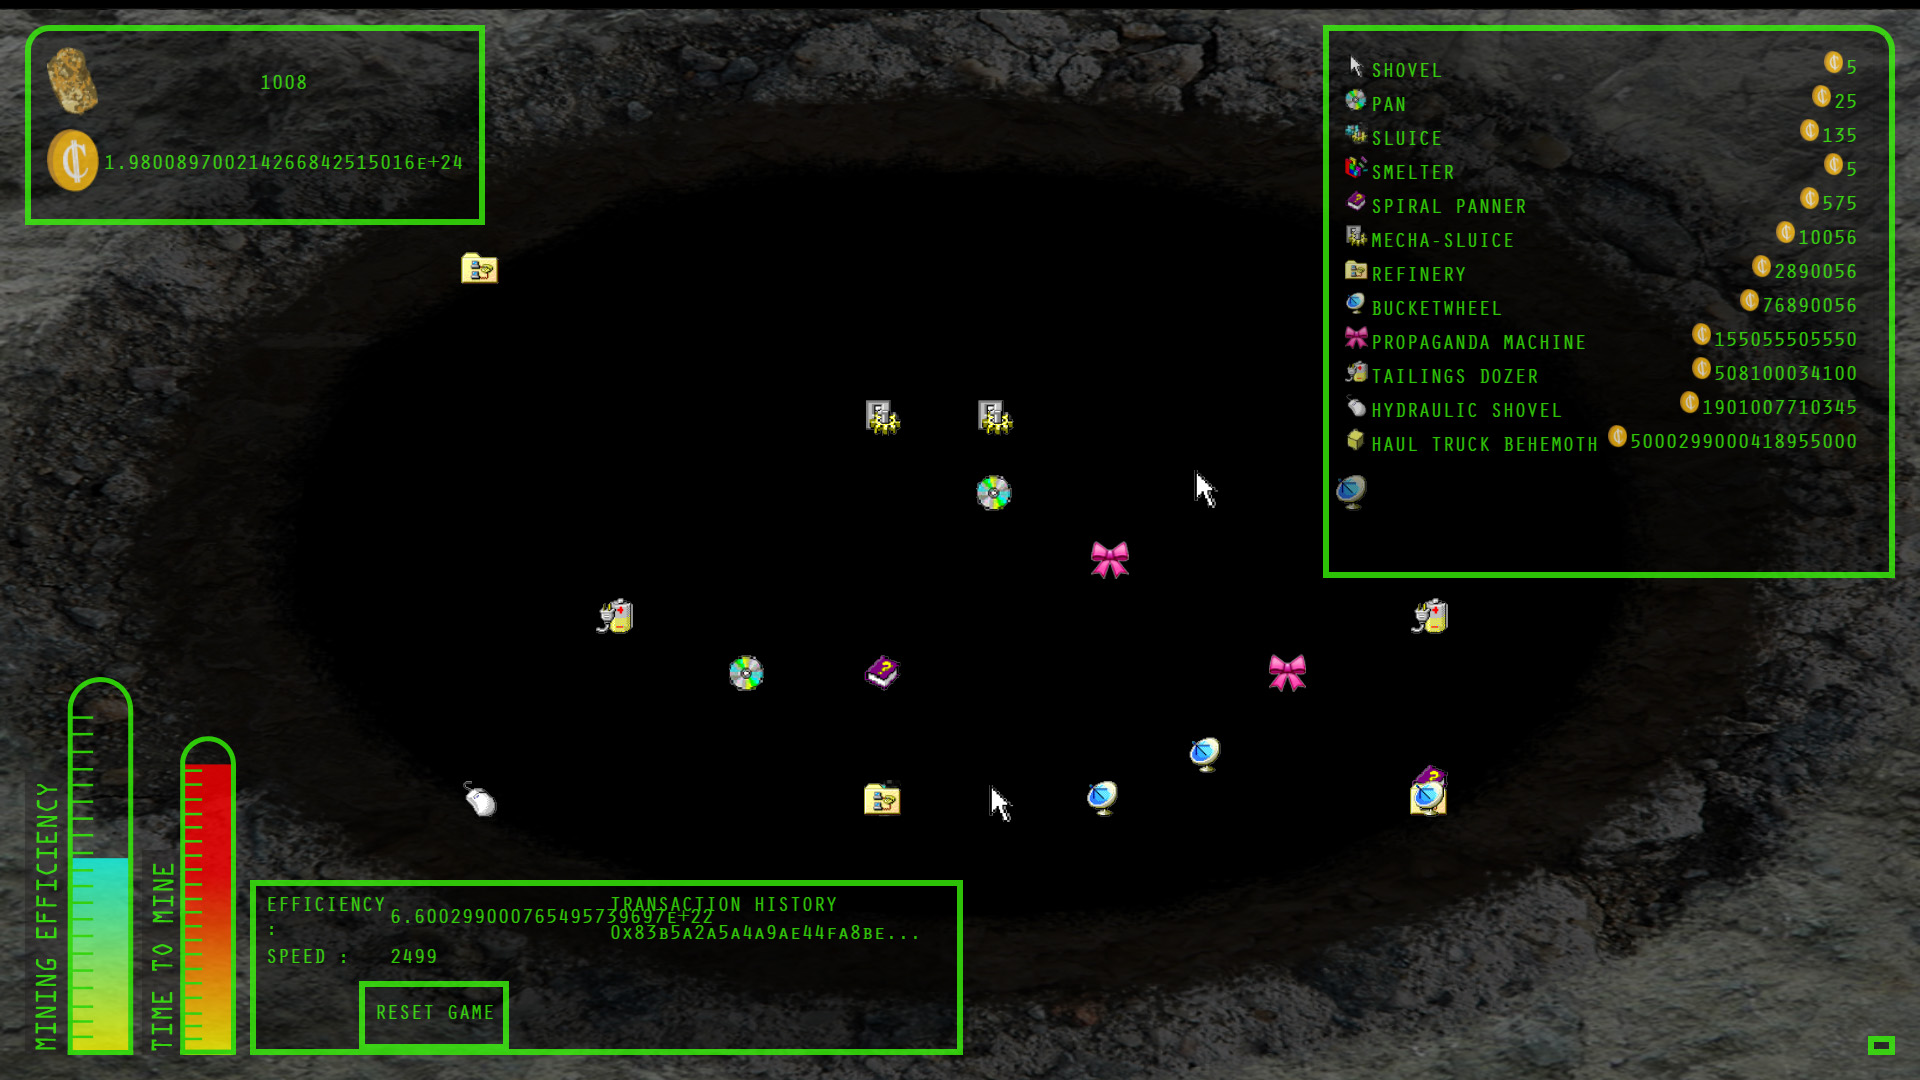 Gameplay from ClickMine, the hole is larger and no grass is visible